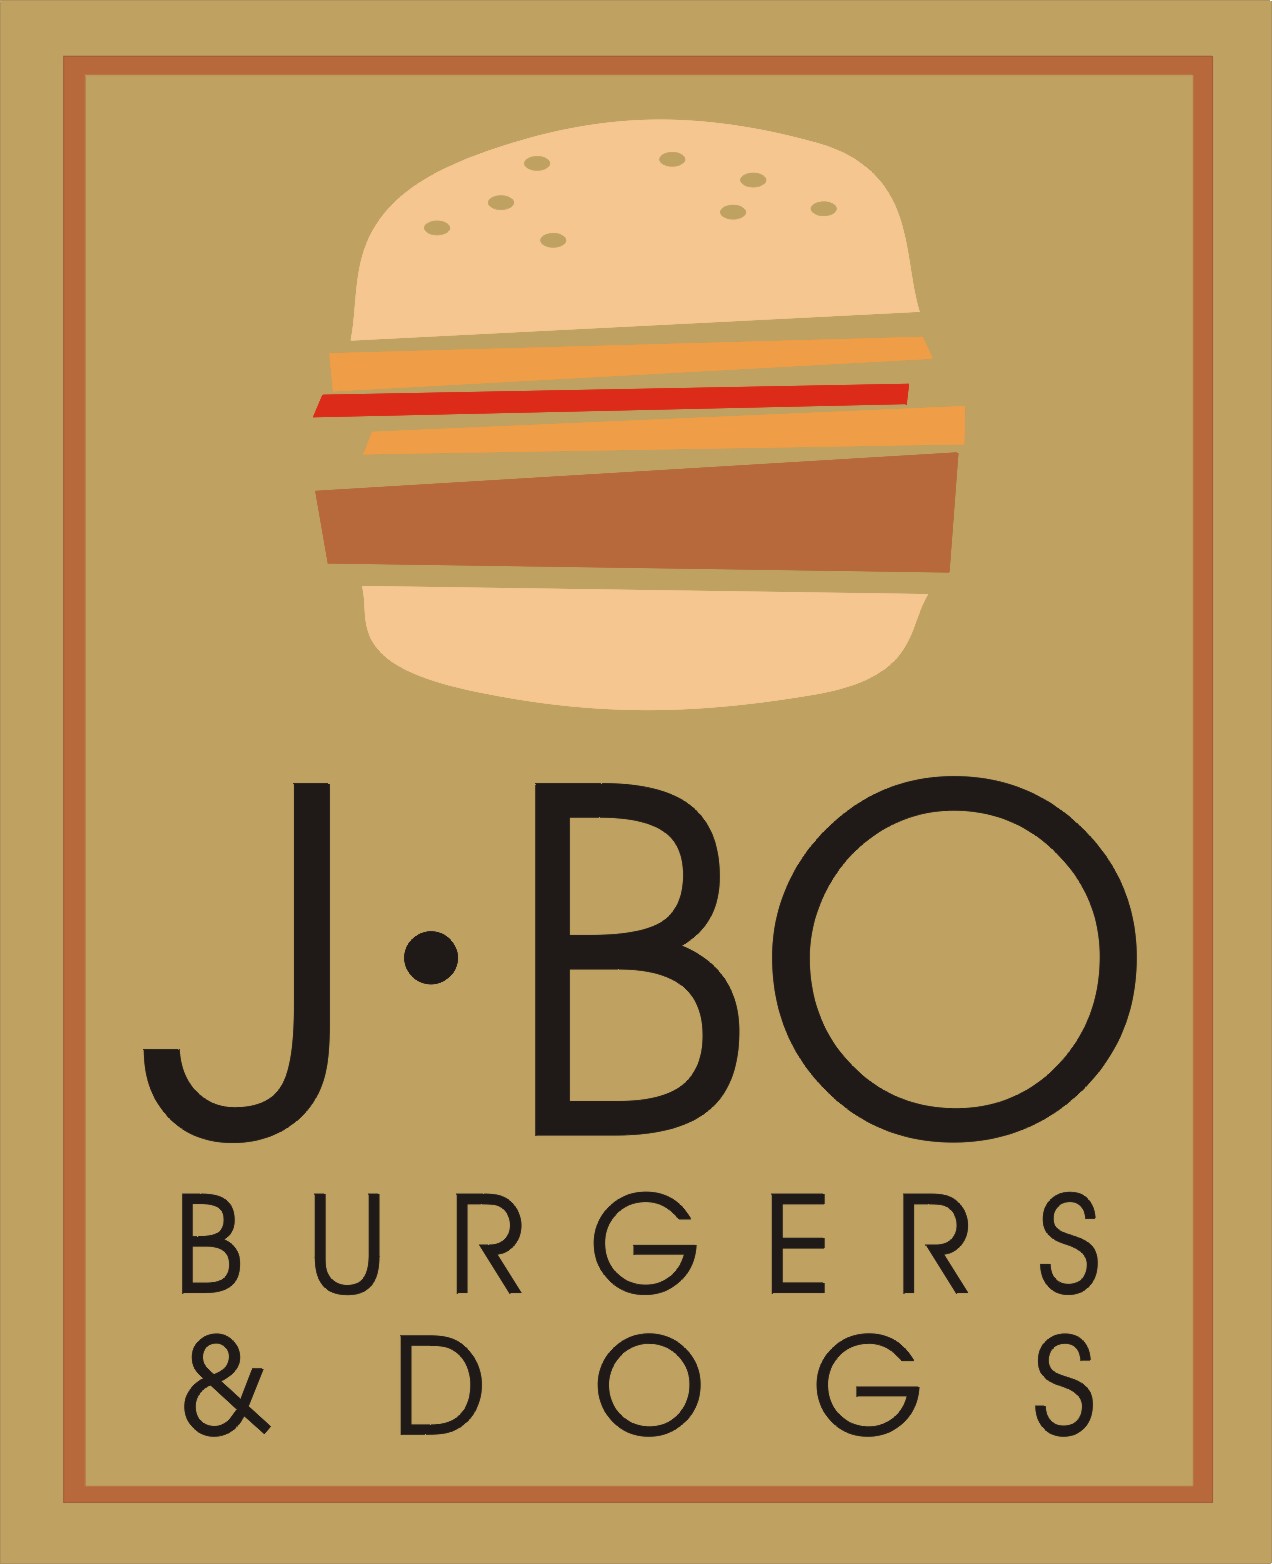 J-BO Burgers & Dogs - New Flavors For an Old Favorite